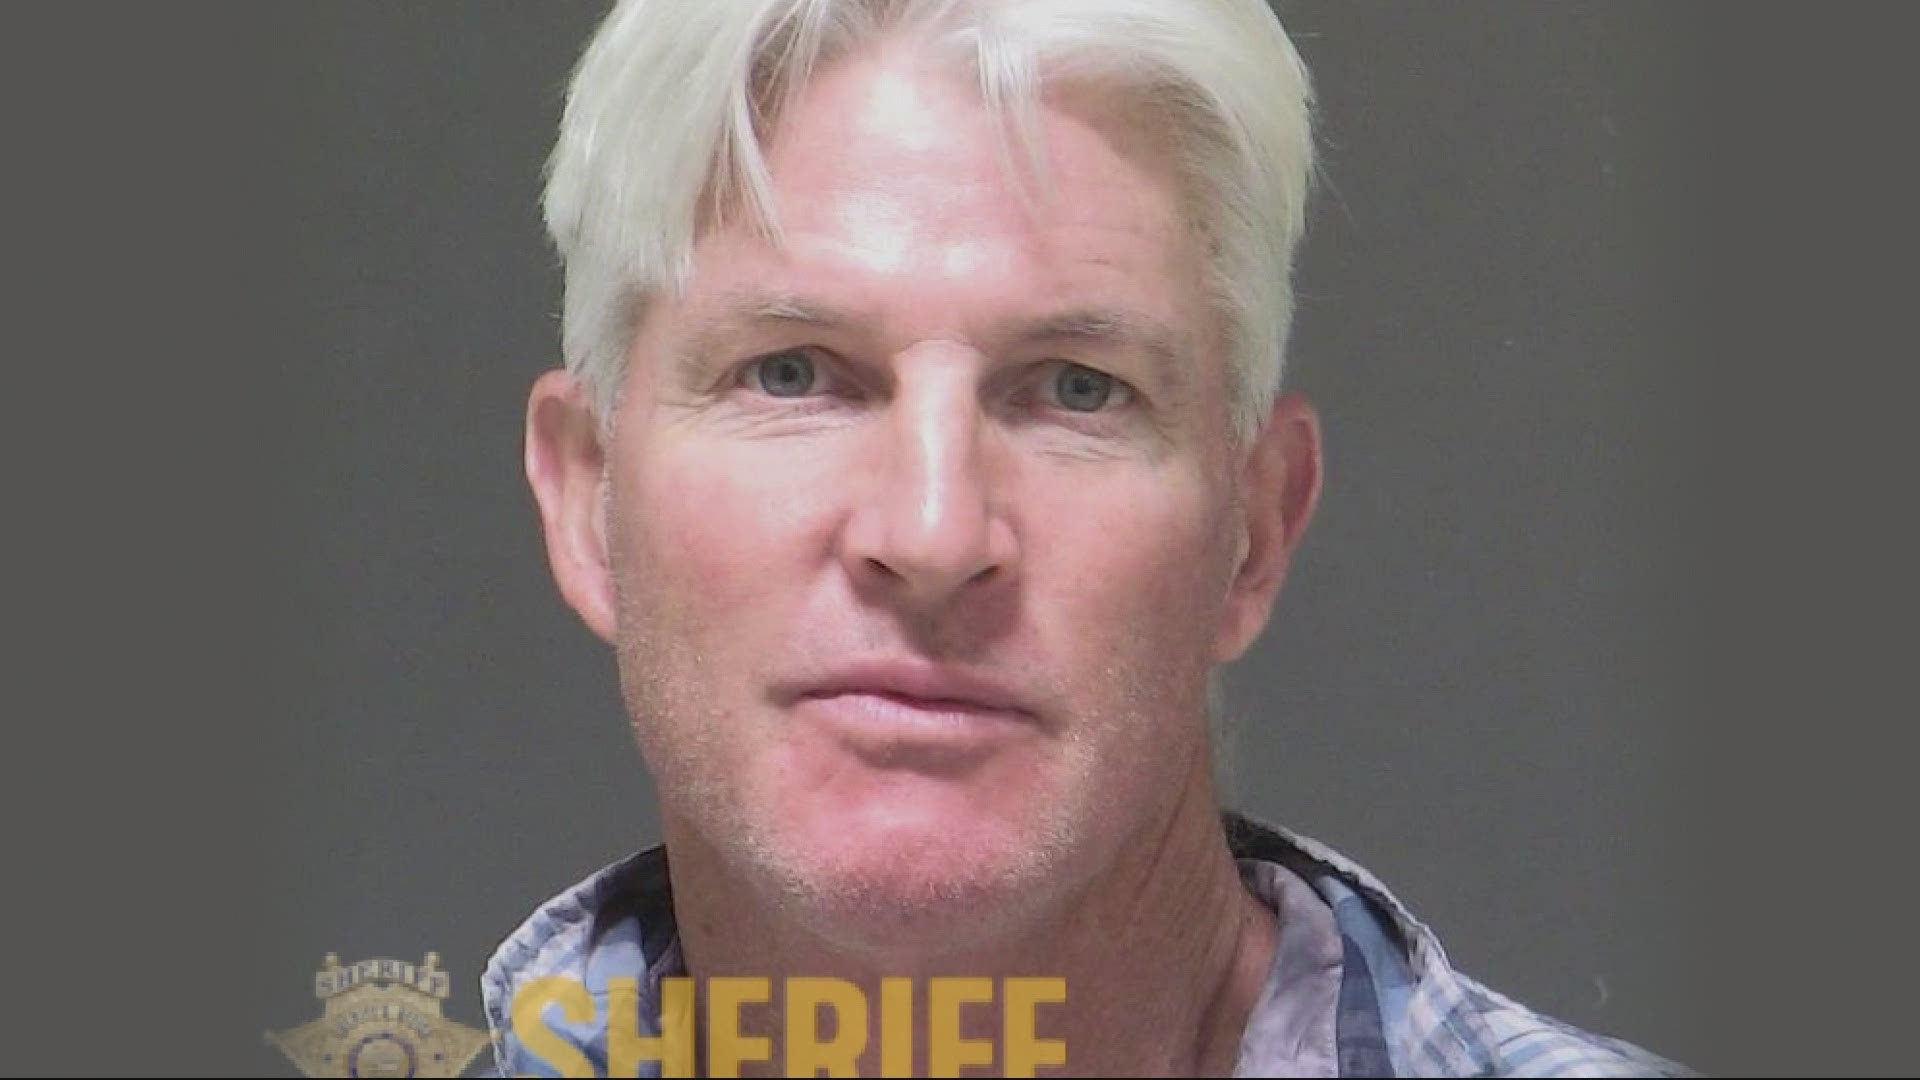 Authorities said Richard Fellers had a sexual relationship with a 17-year-old rider. KGW learned Fellers trained the girl's horse. Mike Benner dug into the case.